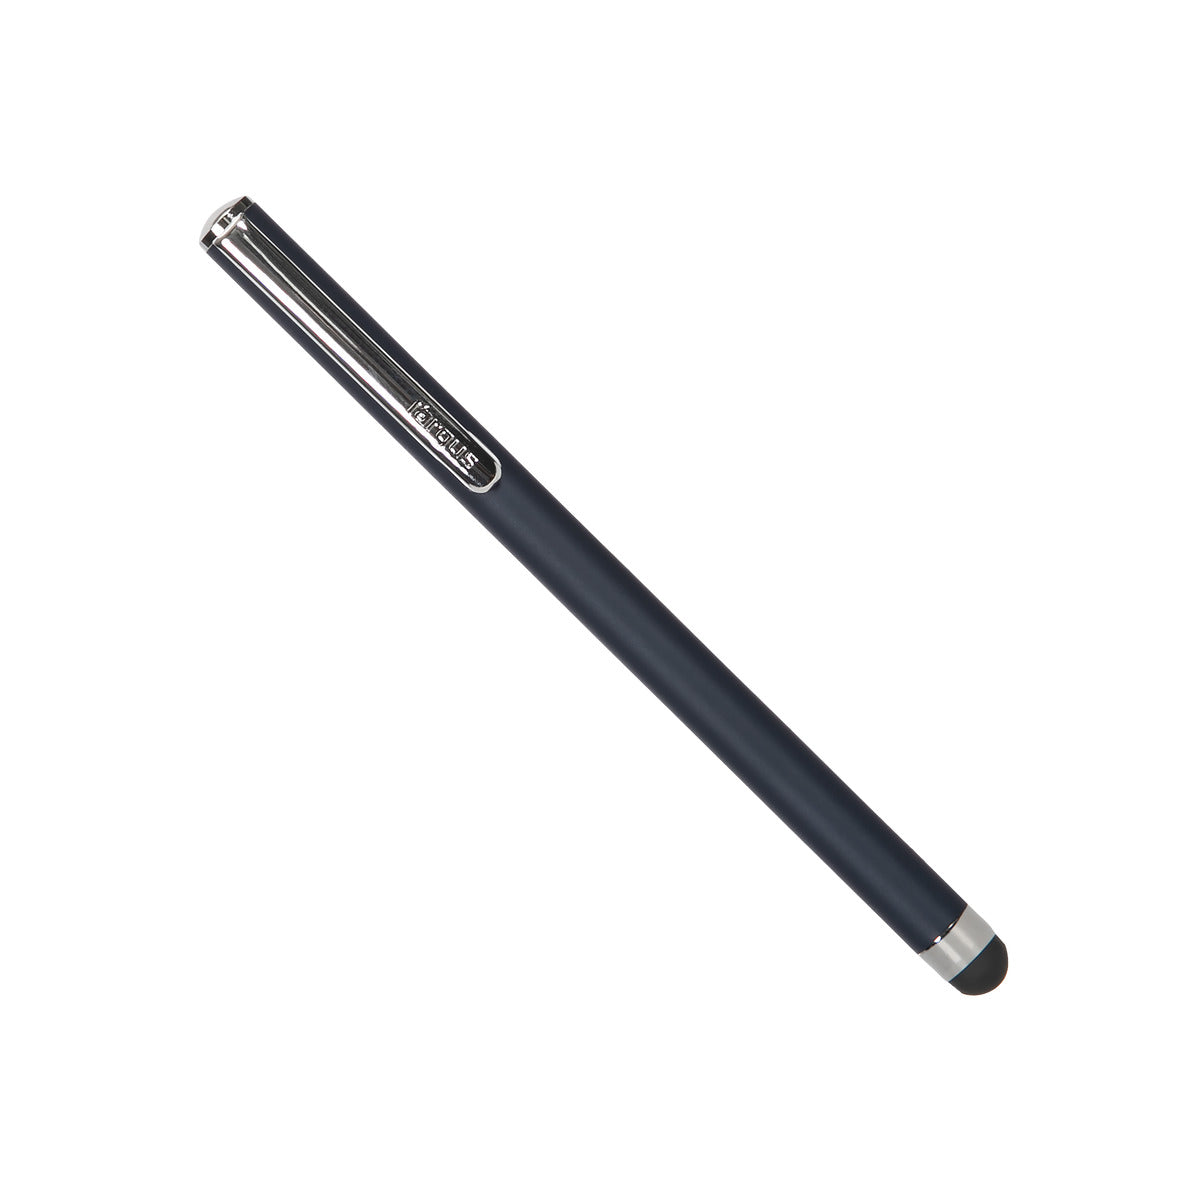 Smooth Writing Pen Smart Tablet Stylus Ipen for Mobile Phone Touch Pencil  Screen - China Smooth Writing Pen and Stylus Ipen for Mobile Phone price